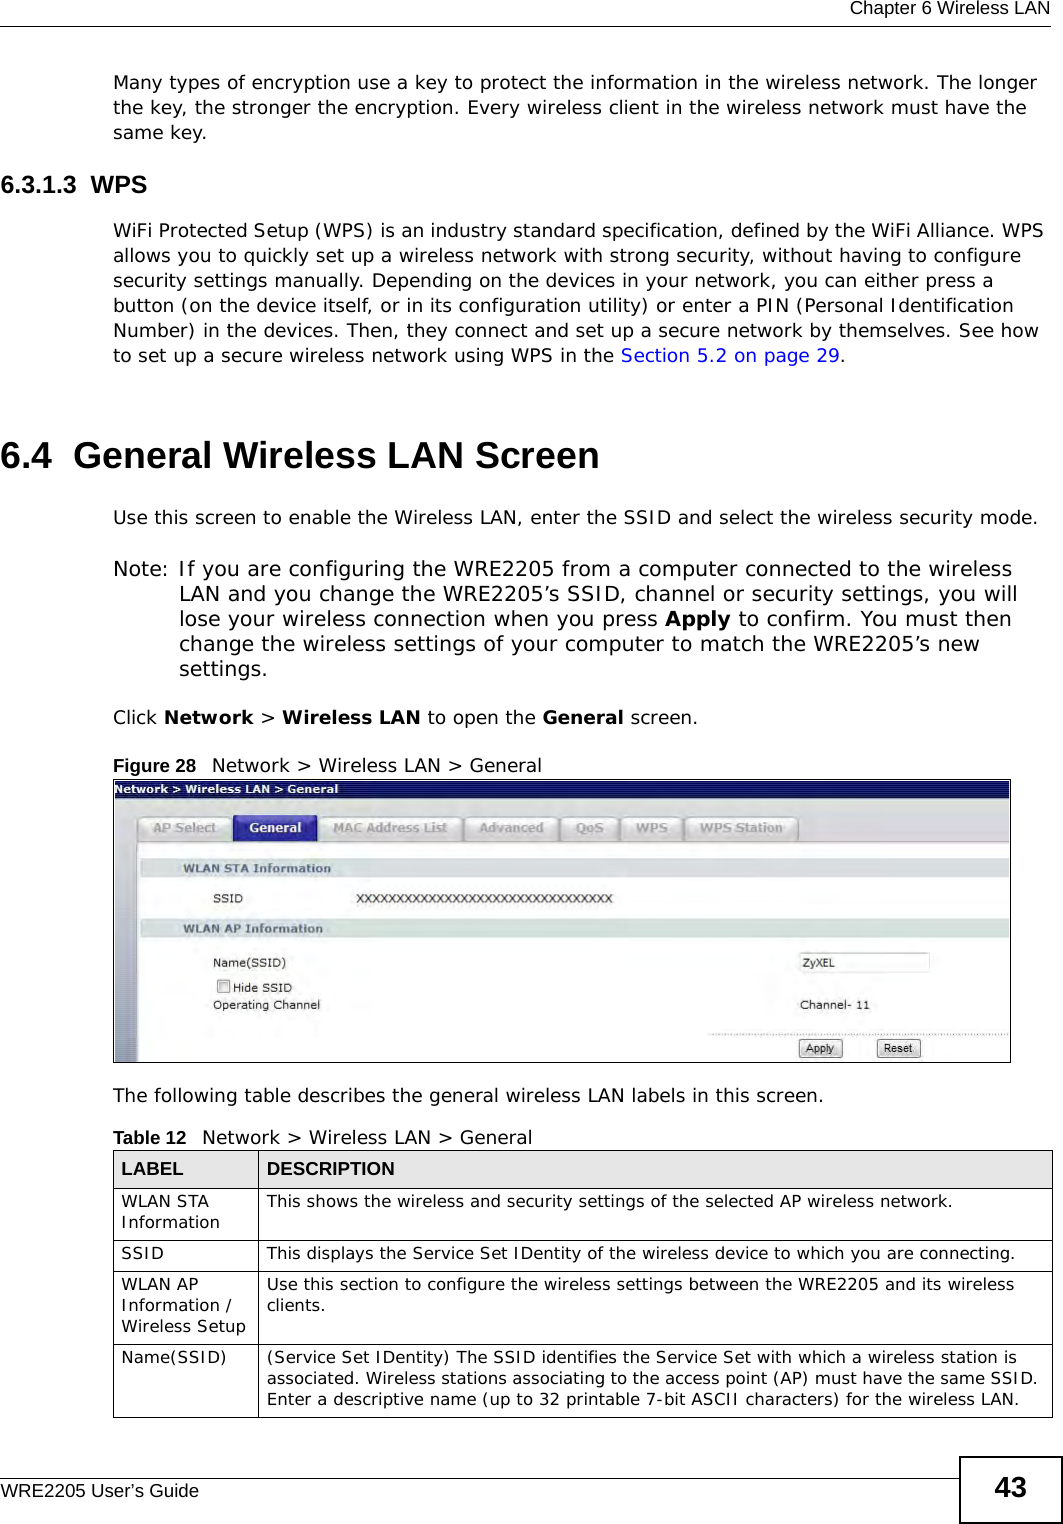  Chapter 6 Wireless LANWRE2205 User’s Guide 43Many types of encryption use a key to protect the information in the wireless network. The longer the key, the stronger the encryption. Every wireless client in the wireless network must have the same key.6.3.1.3  WPSWiFi Protected Setup (WPS) is an industry standard specification, defined by the WiFi Alliance. WPS allows you to quickly set up a wireless network with strong security, without having to configure security settings manually. Depending on the devices in your network, you can either press a button (on the device itself, or in its configuration utility) or enter a PIN (Personal Identification Number) in the devices. Then, they connect and set up a secure network by themselves. See how to set up a secure wireless network using WPS in the Section 5.2 on page 29. 6.4  General Wireless LAN Screen Use this screen to enable the Wireless LAN, enter the SSID and select the wireless security mode.Note: If you are configuring the WRE2205 from a computer connected to the wireless LAN and you change the WRE2205’s SSID, channel or security settings, you will lose your wireless connection when you press Apply to confirm. You must then change the wireless settings of your computer to match the WRE2205’s new settings.Click Network &gt; Wireless LAN to open the General screen.Figure 28   Network &gt; Wireless LAN &gt; General The following table describes the general wireless LAN labels in this screen.Table 12   Network &gt; Wireless LAN &gt; GeneralLABEL DESCRIPTIONWLAN STA Information This shows the wireless and security settings of the selected AP wireless network.SSID This displays the Service Set IDentity of the wireless device to which you are connecting.WLAN AP Information / Wireless SetupUse this section to configure the wireless settings between the WRE2205 and its wireless clients.Name(SSID) (Service Set IDentity) The SSID identifies the Service Set with which a wireless station is associated. Wireless stations associating to the access point (AP) must have the same SSID. Enter a descriptive name (up to 32 printable 7-bit ASCII characters) for the wireless LAN. 